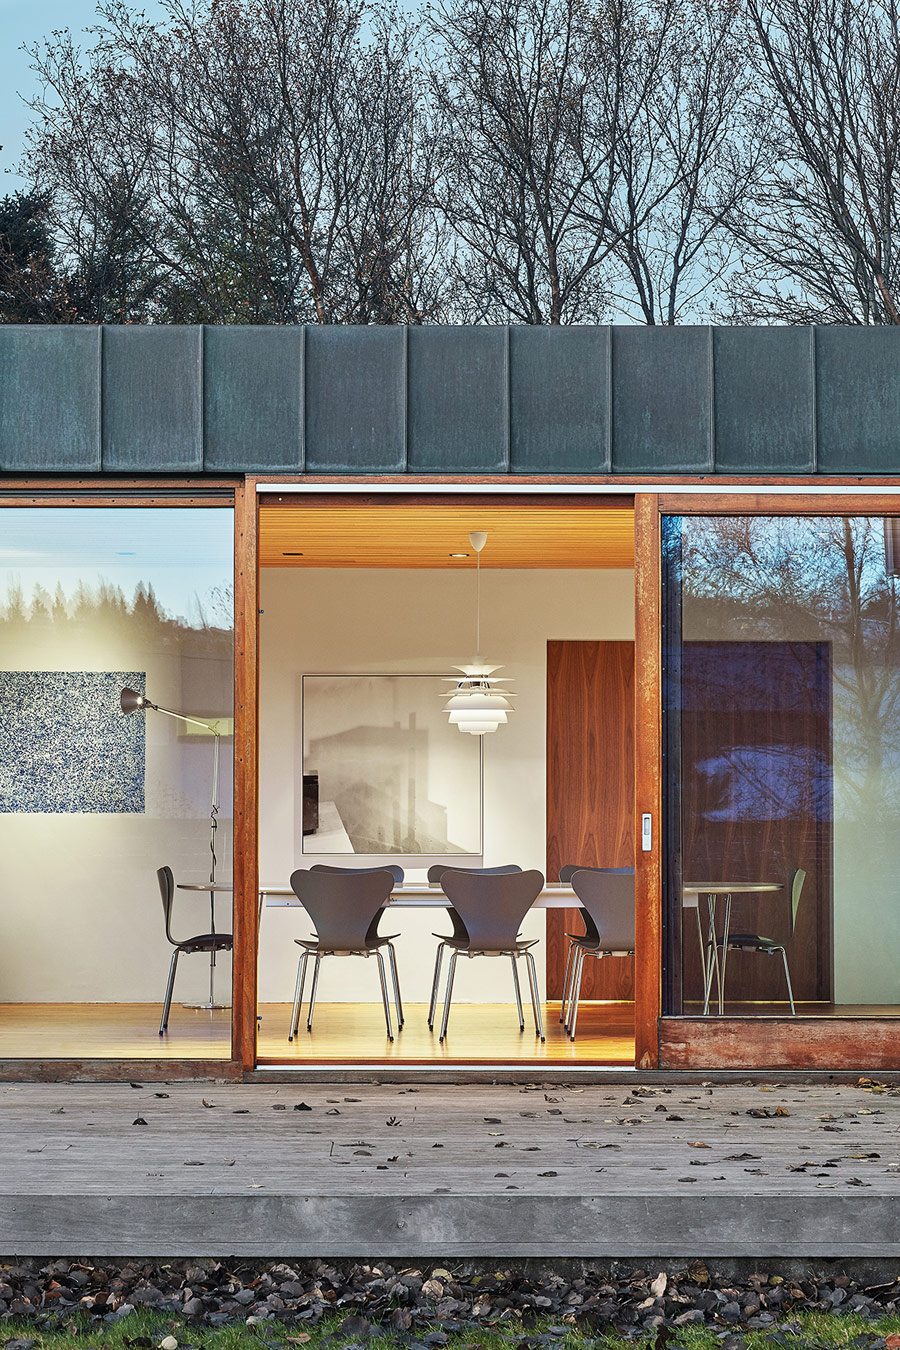 All the walls feature sliding doors to enter a deck or just enjoy fresh air coming inside